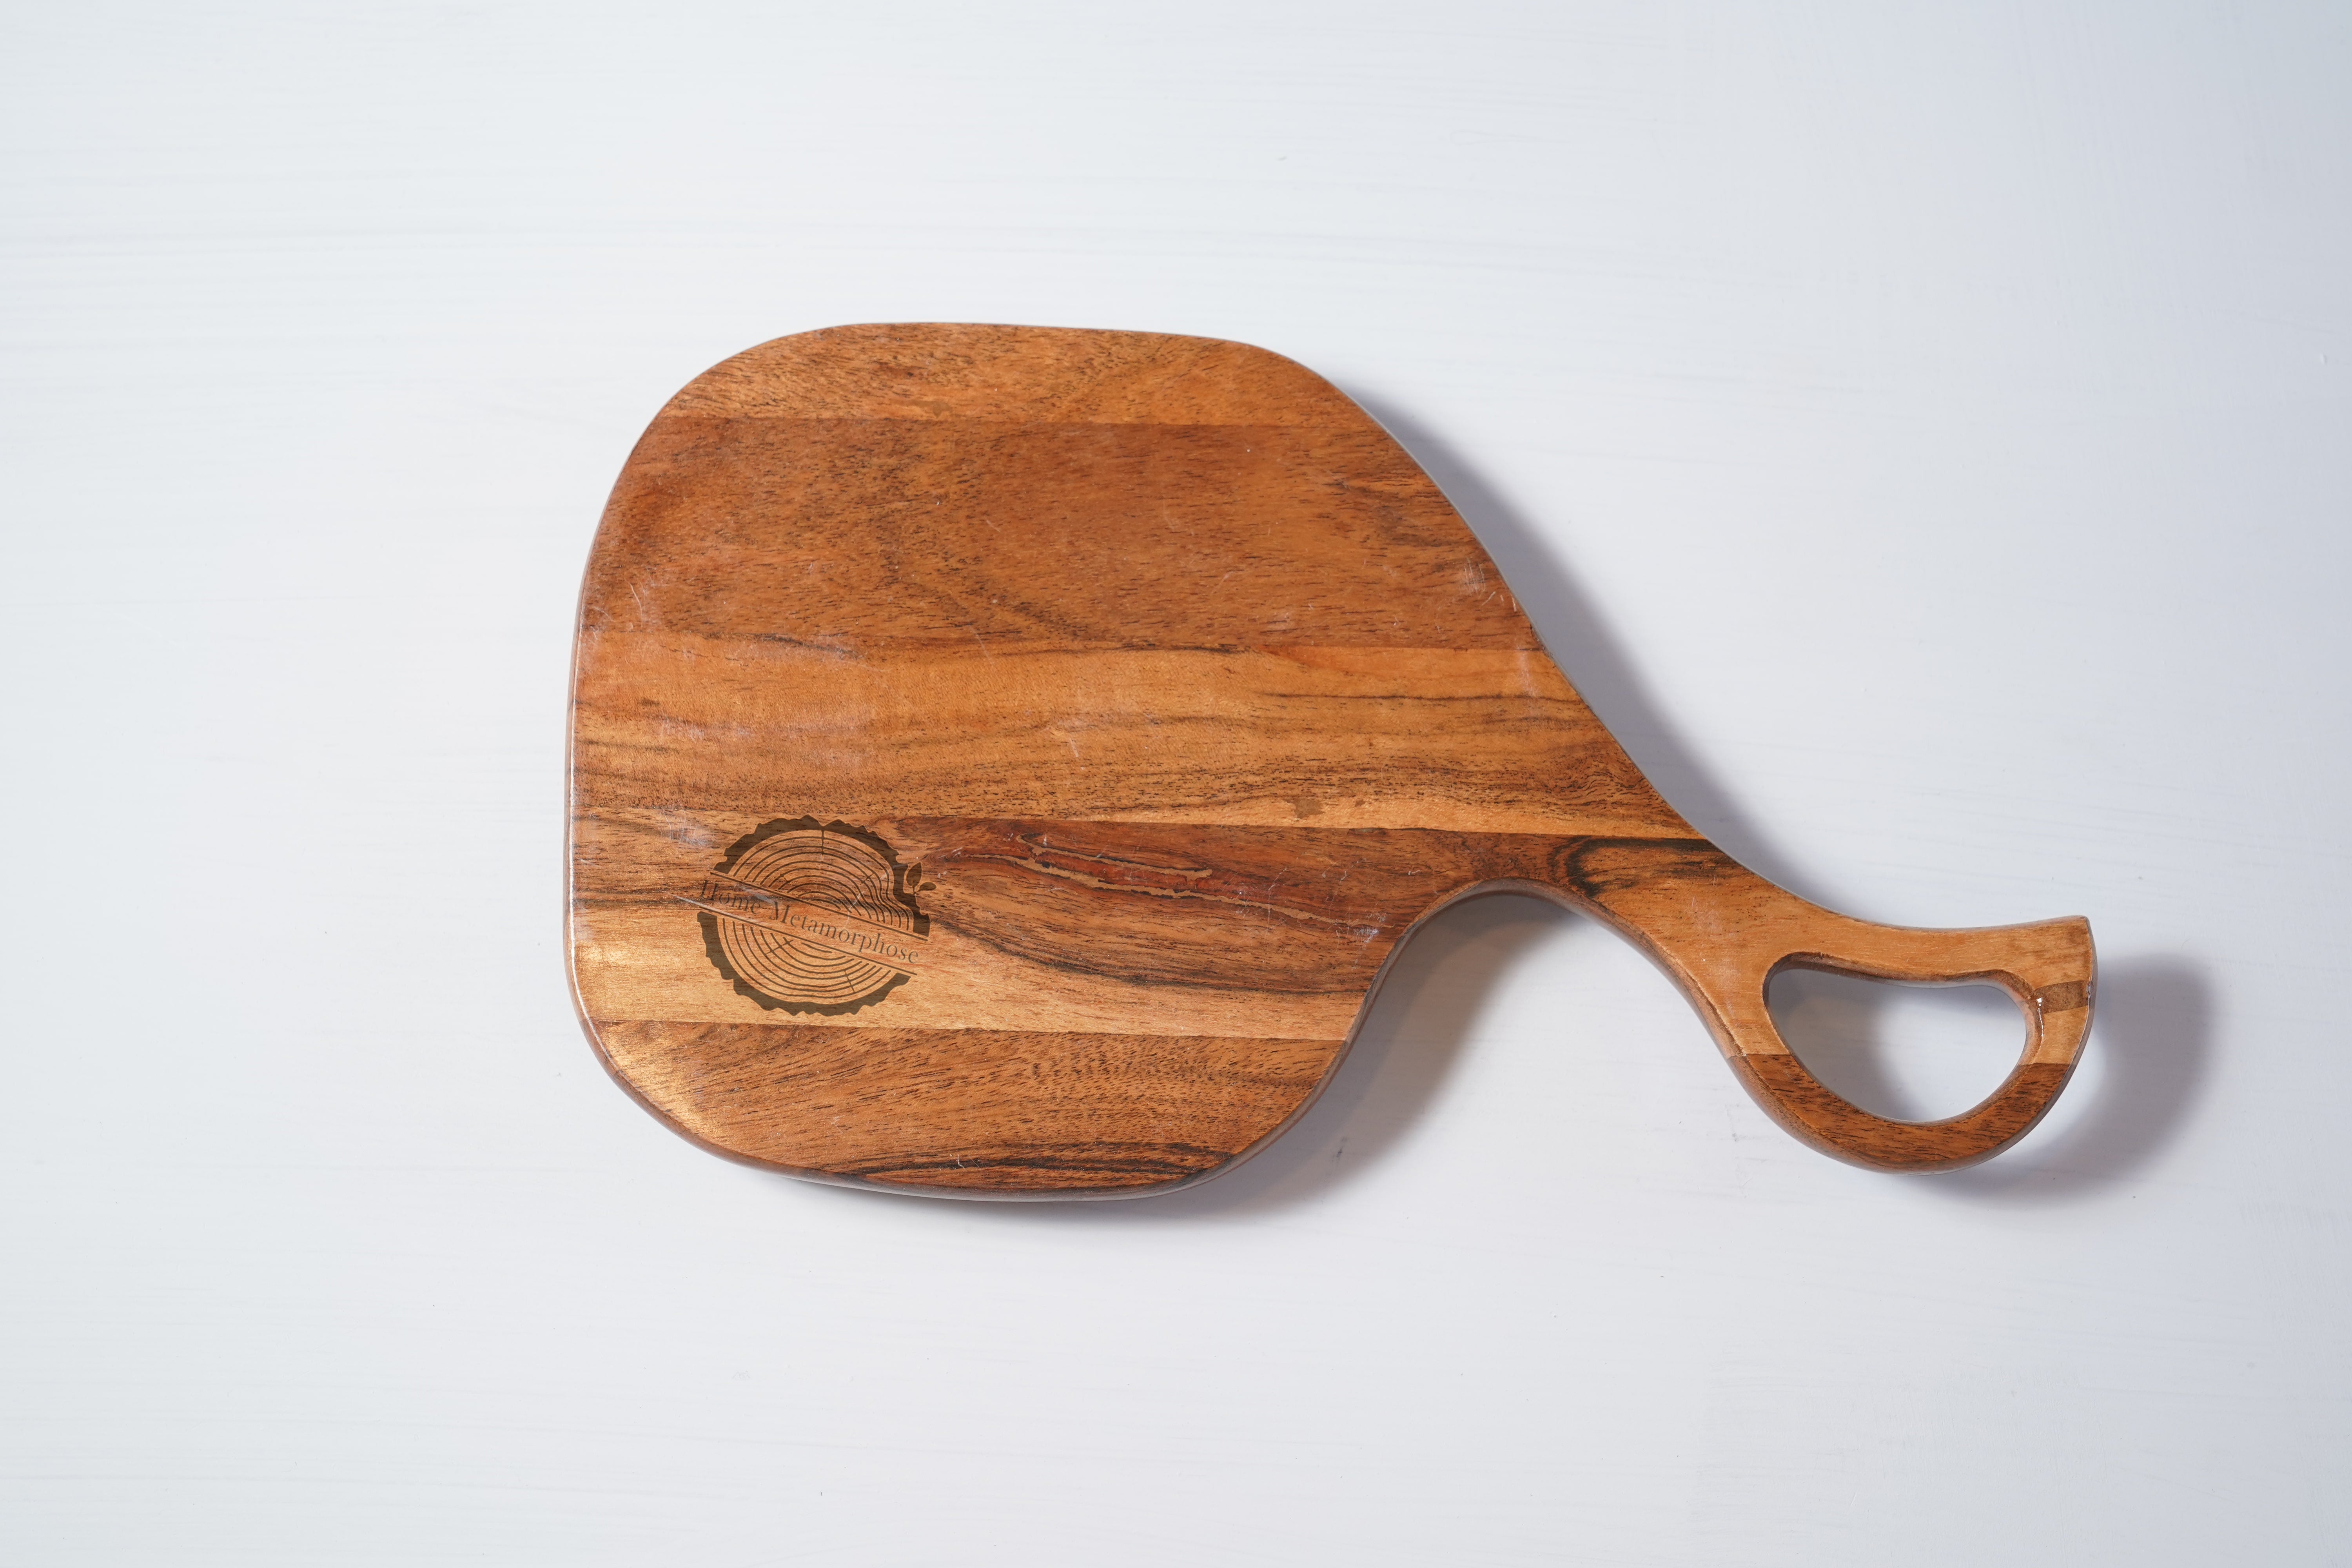 Round with Handle Mango Wood Cutting Board - Wooden Kitchen Chopping Boards for Meat, Cheese, Bread, Vegetables &Fruits- Knife Friendly Kitchen Butcher Block